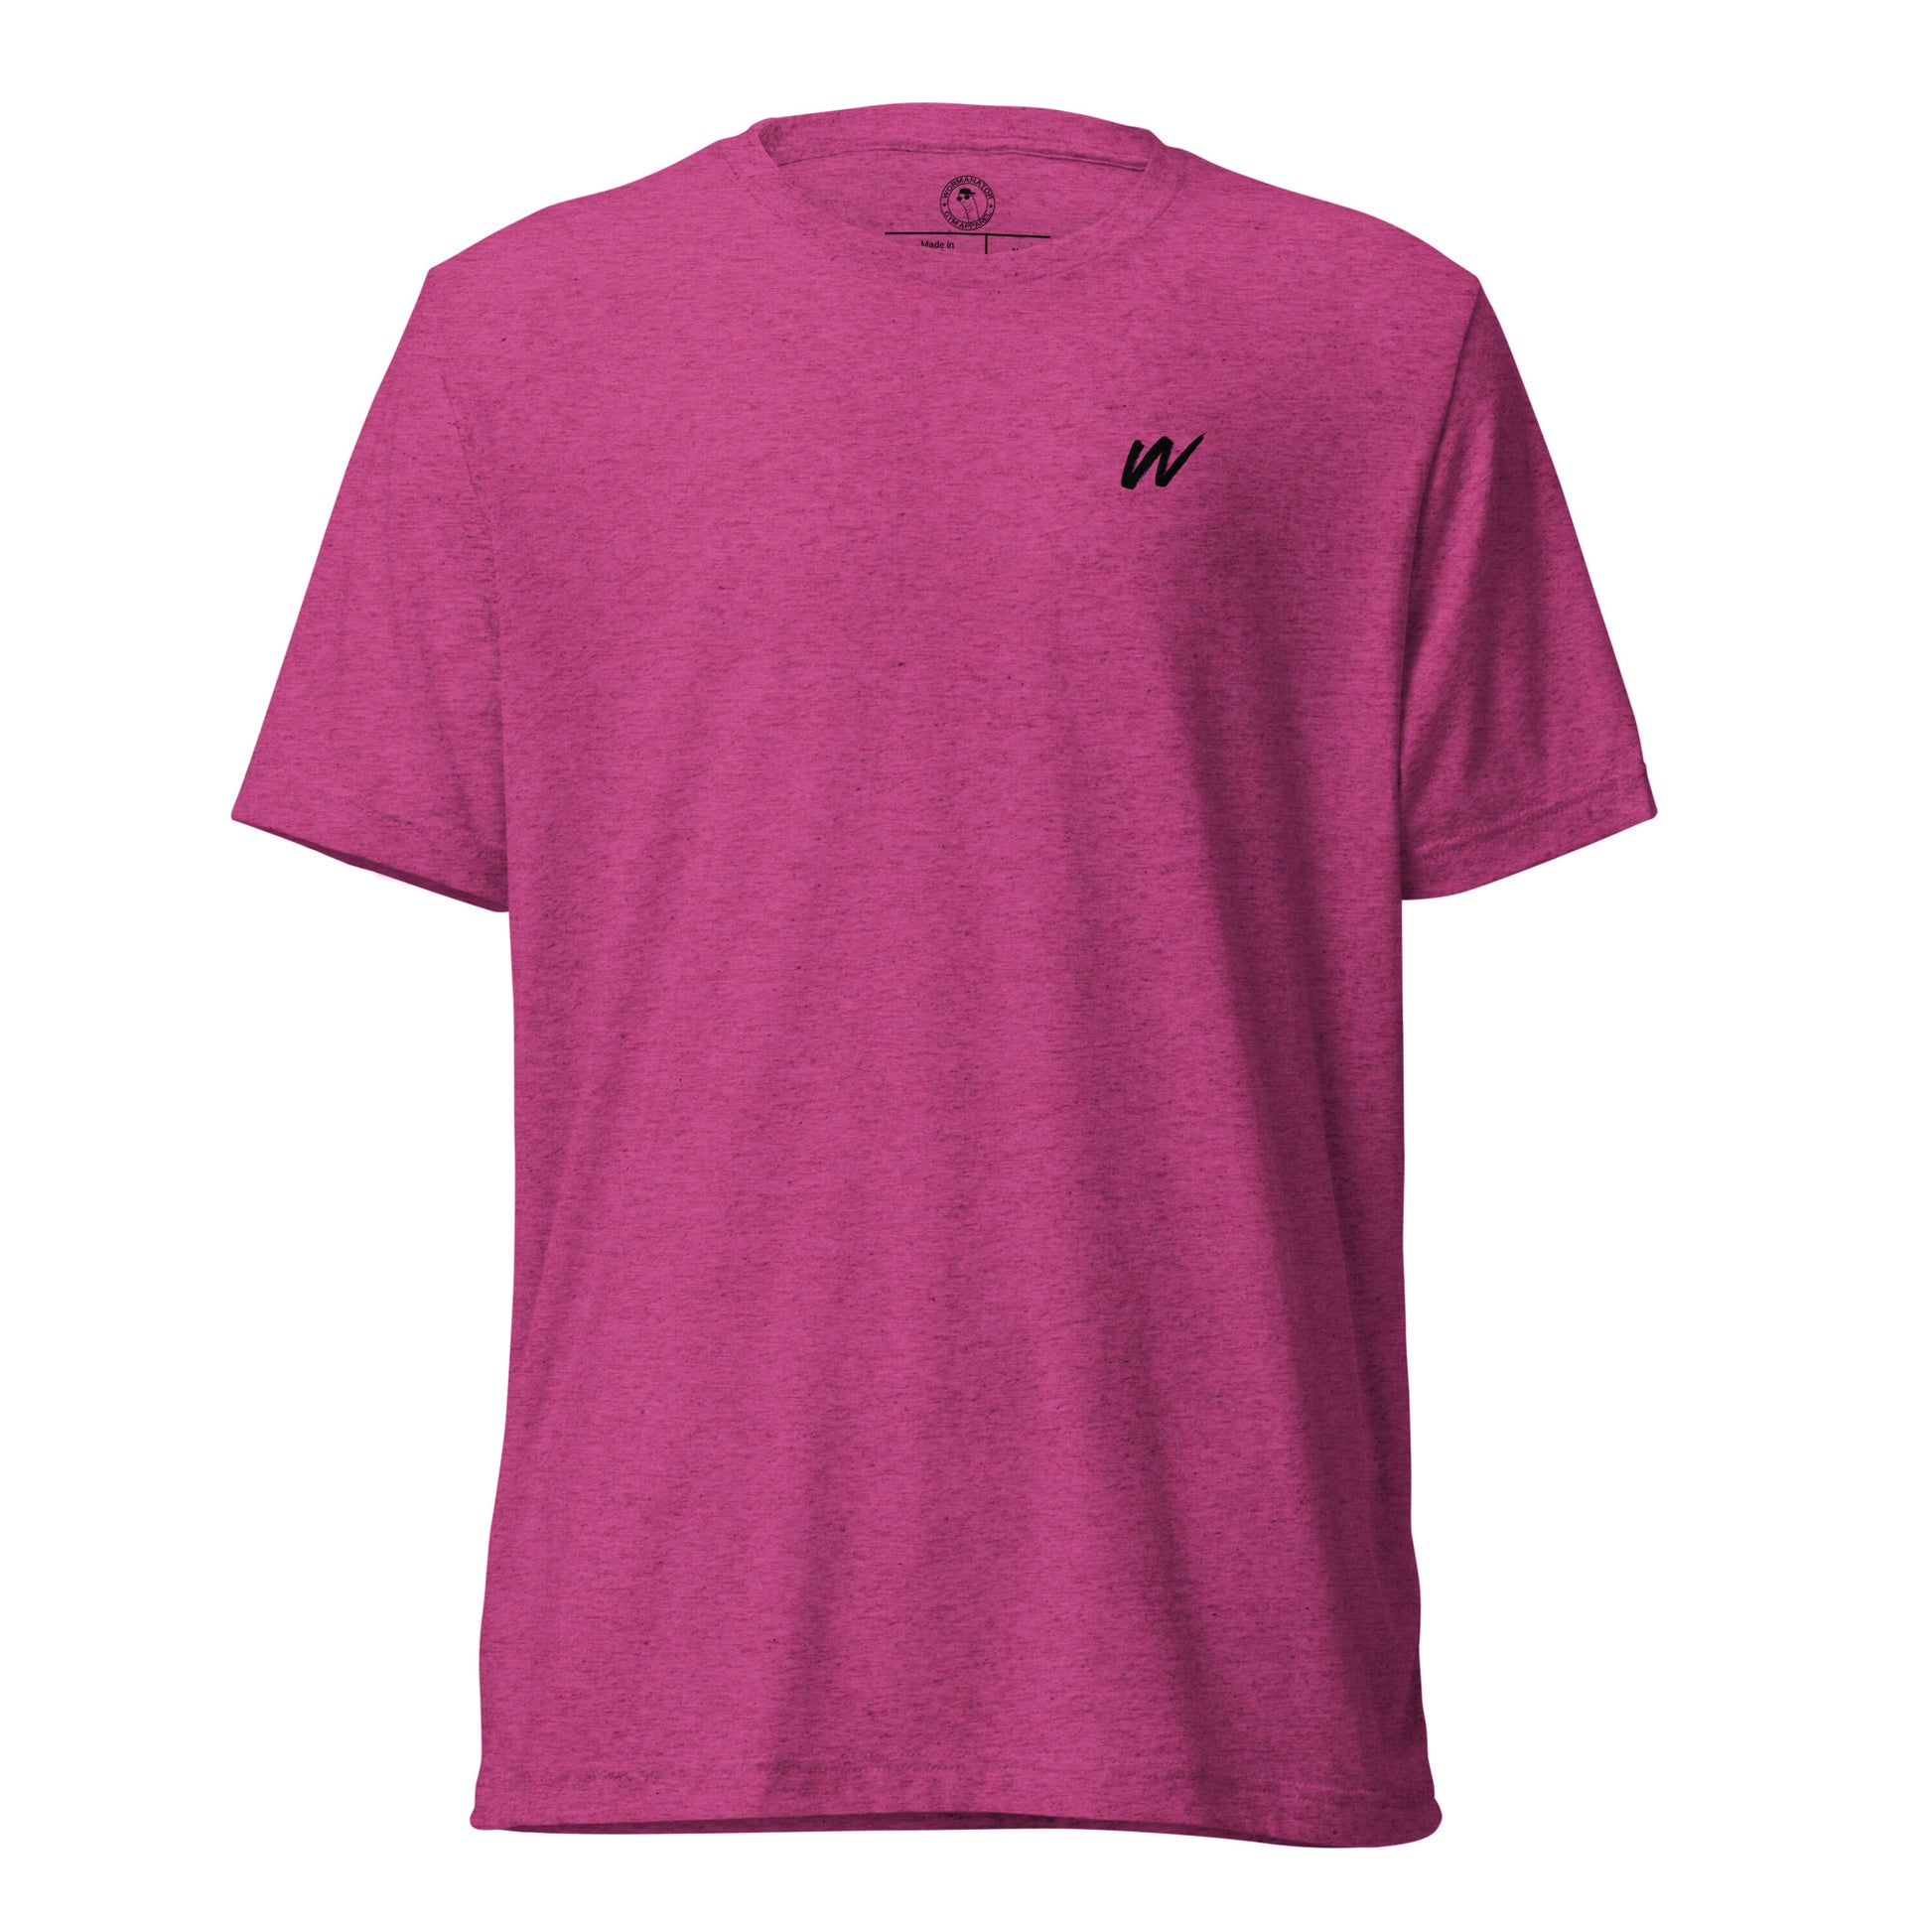 Win the Day T-Shirt in Berry Triblend